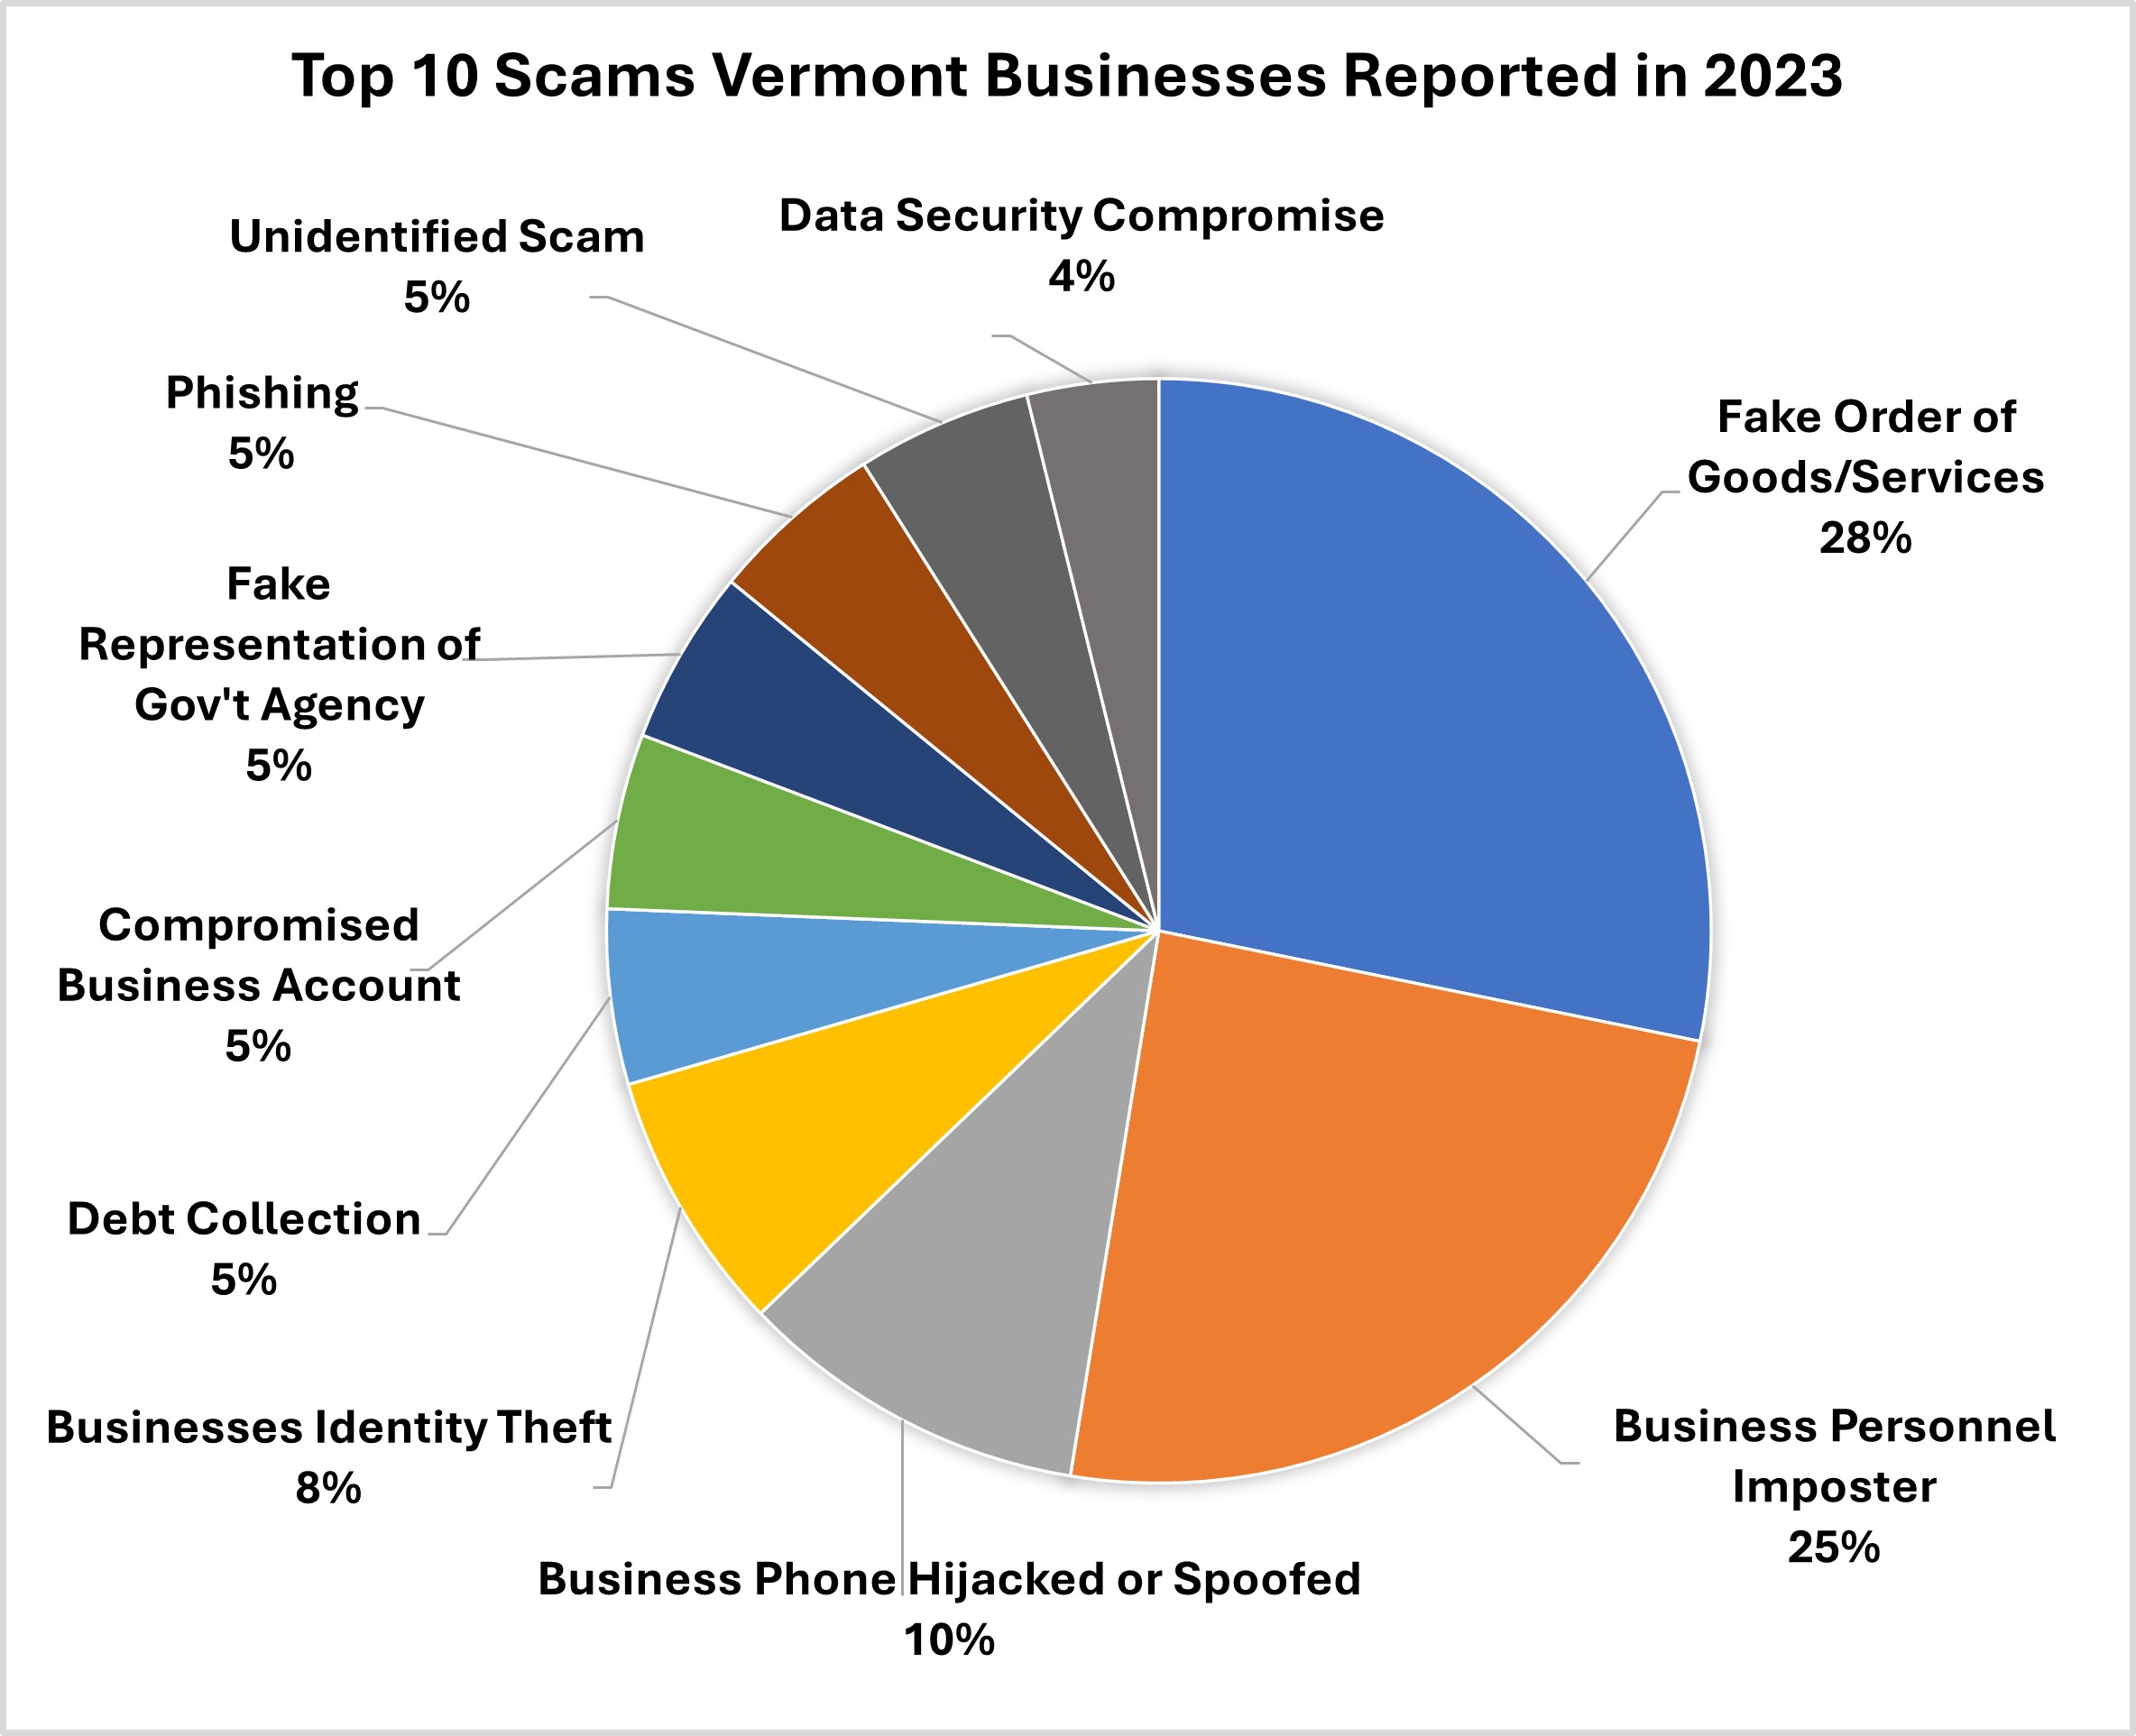 Top 10 Scams Vermont Businesses Reported in 2023. Fake Order of Goods/Services, 28%; Business Personnel Imposter, 25%; Business Phone Hijacked or Spoofed, 10%; Business Identity Theft, 8%; Debt Collection, 5%; Compromised Business Account, 5%; Fake Representation of Gov't Agency, 5%; Phishing, 5%; Unidentified Scam, 5%; Data Security Compromise, 4%